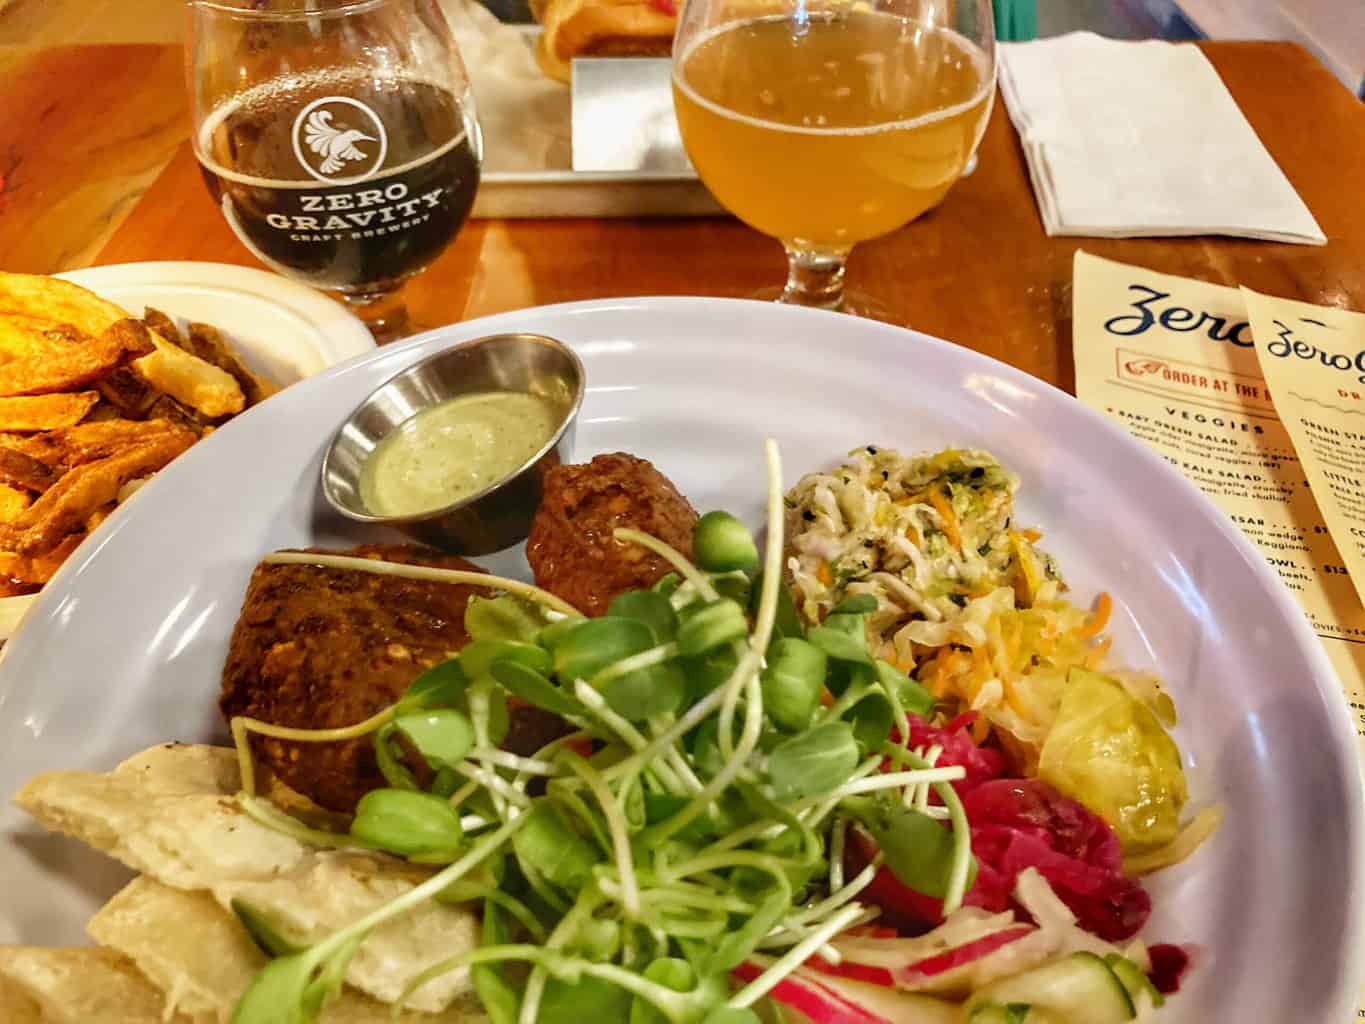 A platter of food and a few beers on the table at Zero Gravity Brewing in Burlington.